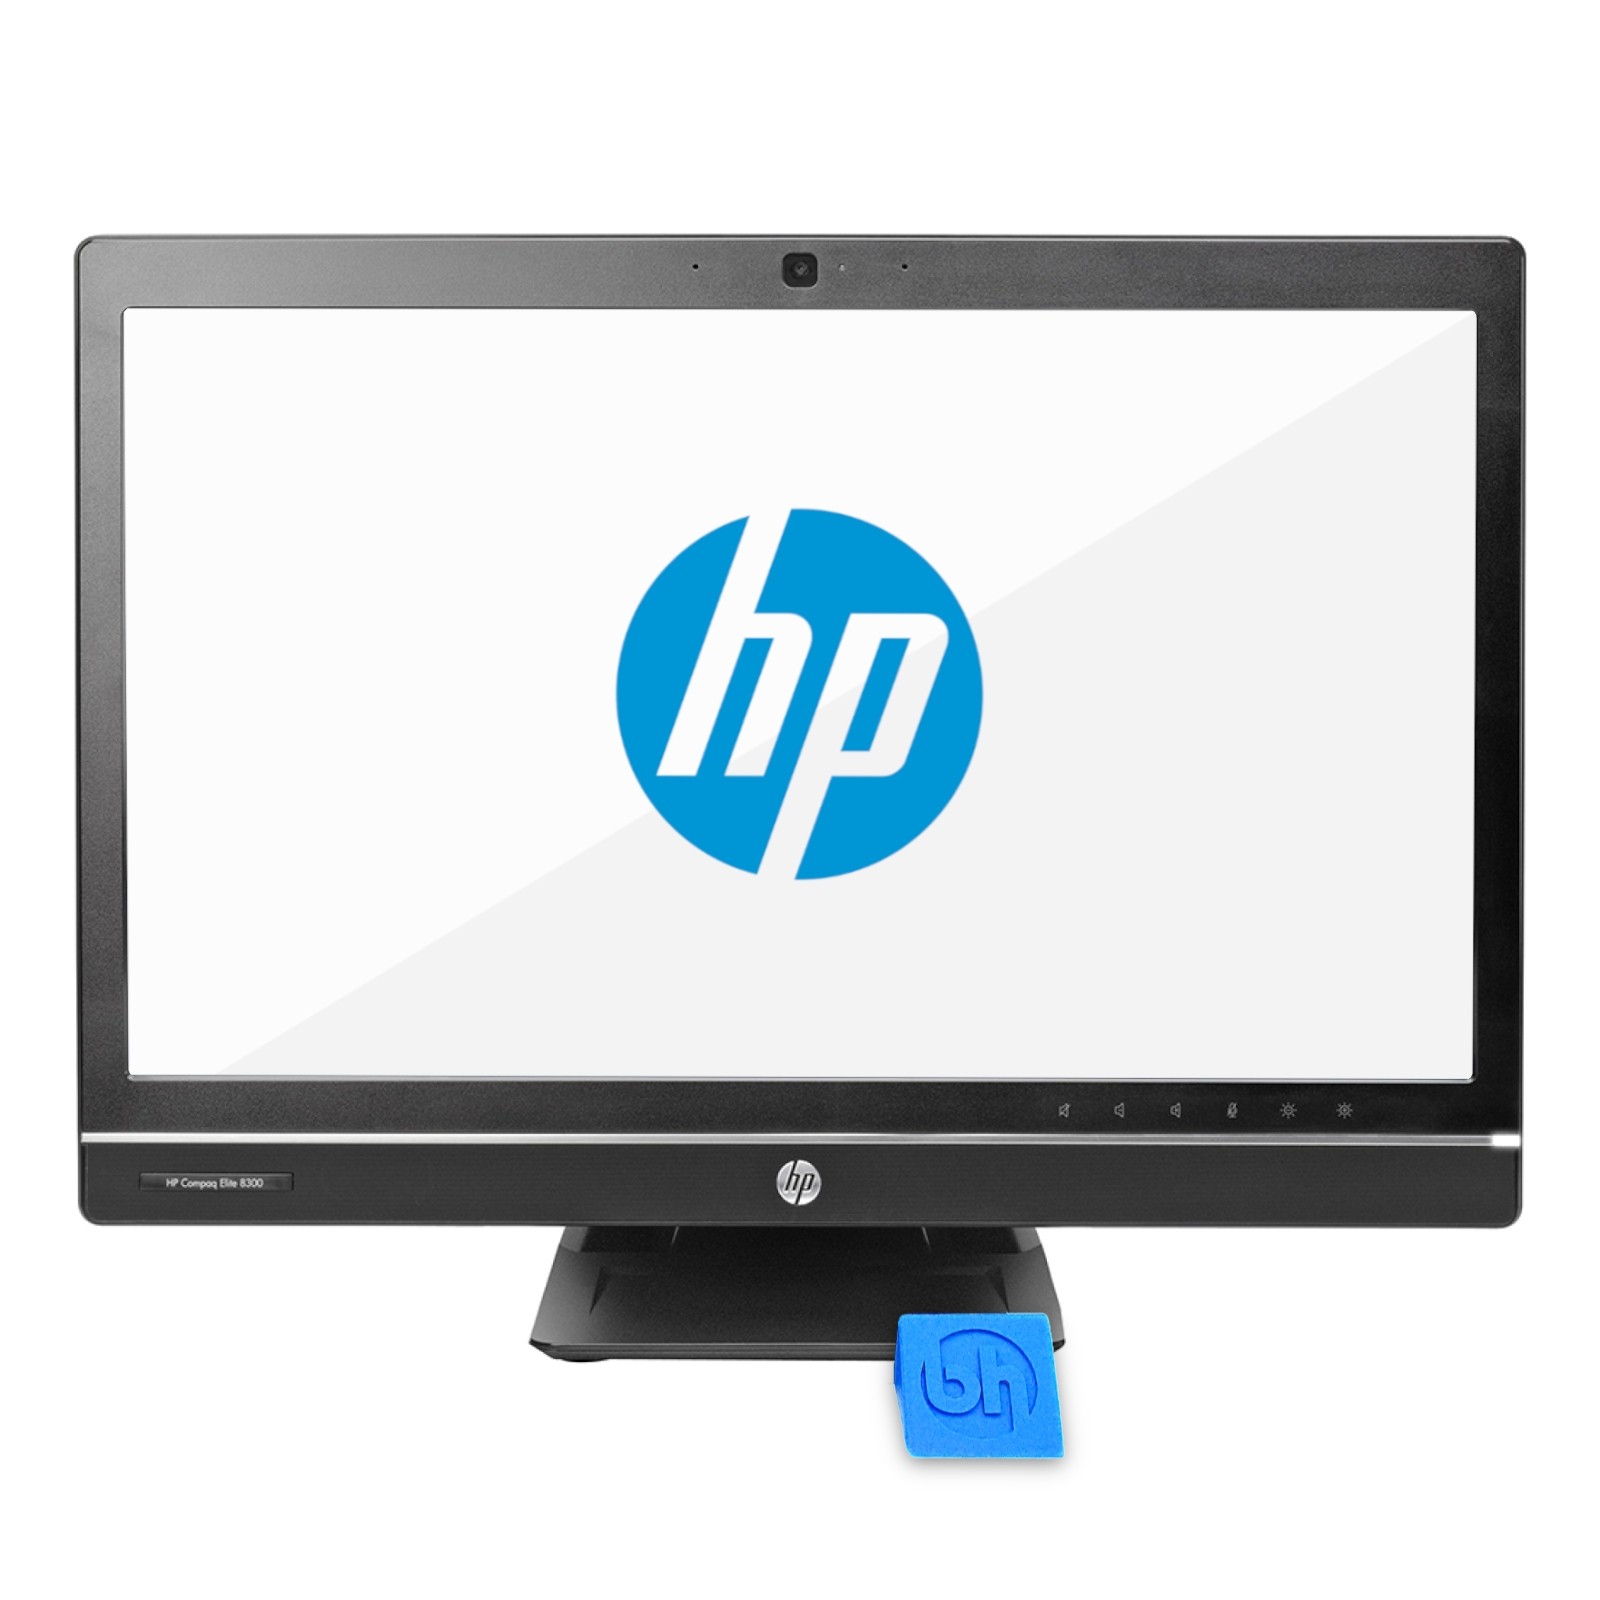 HP Compaq Elite 8300 Touchscreen All-in-One Desktop PC Front